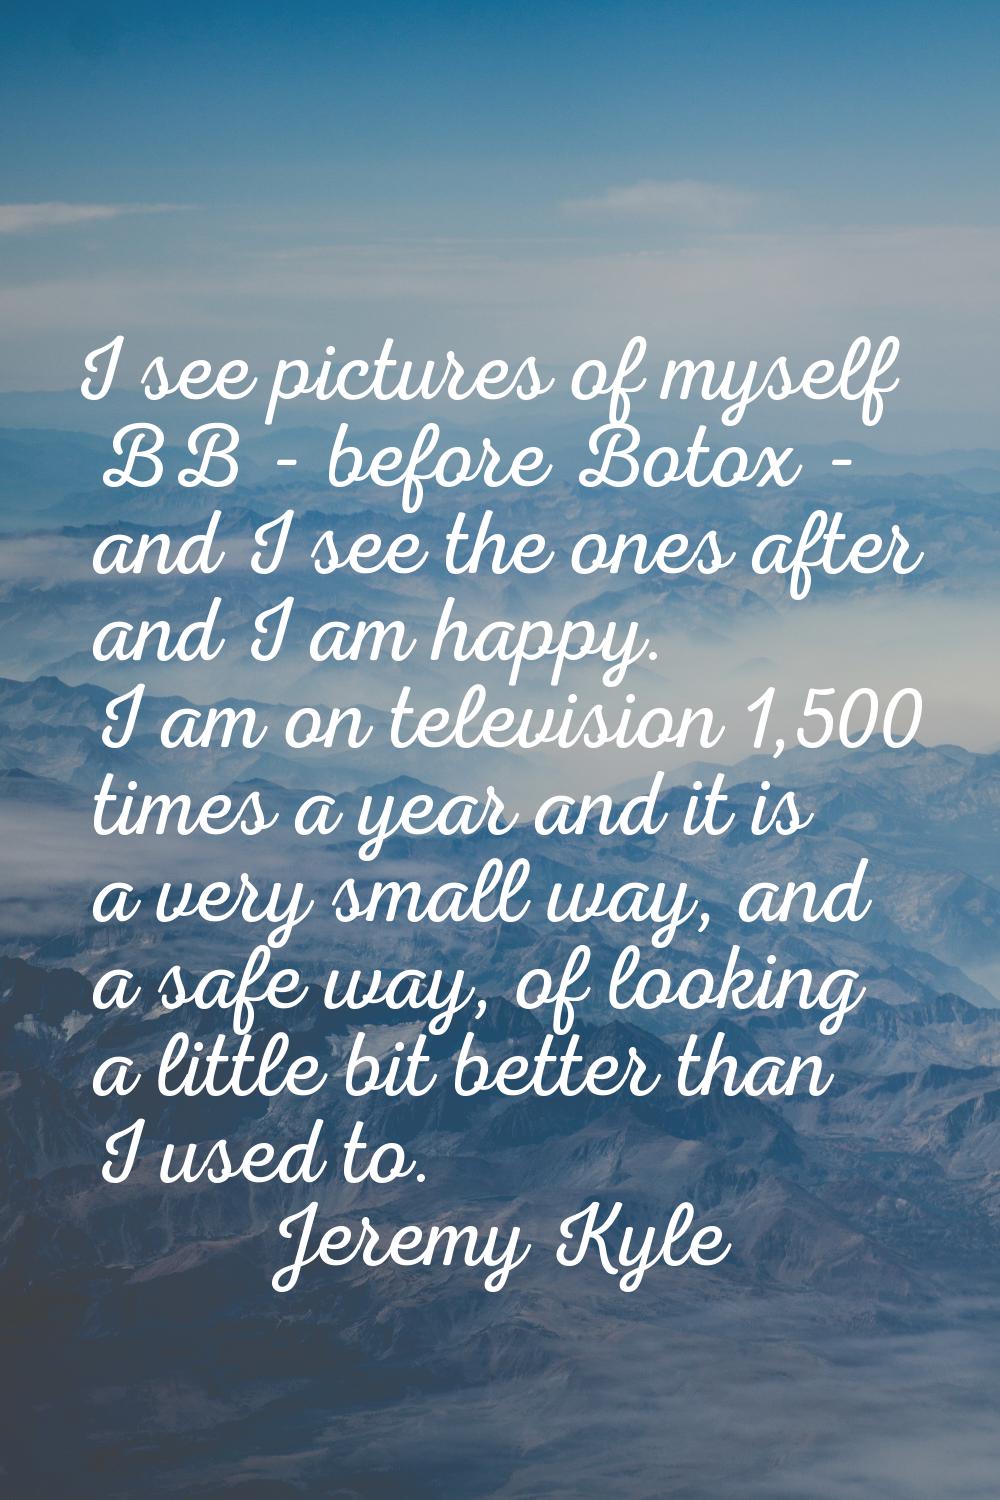 I see pictures of myself BB - before Botox - and I see the ones after and I am happy. I am on telev